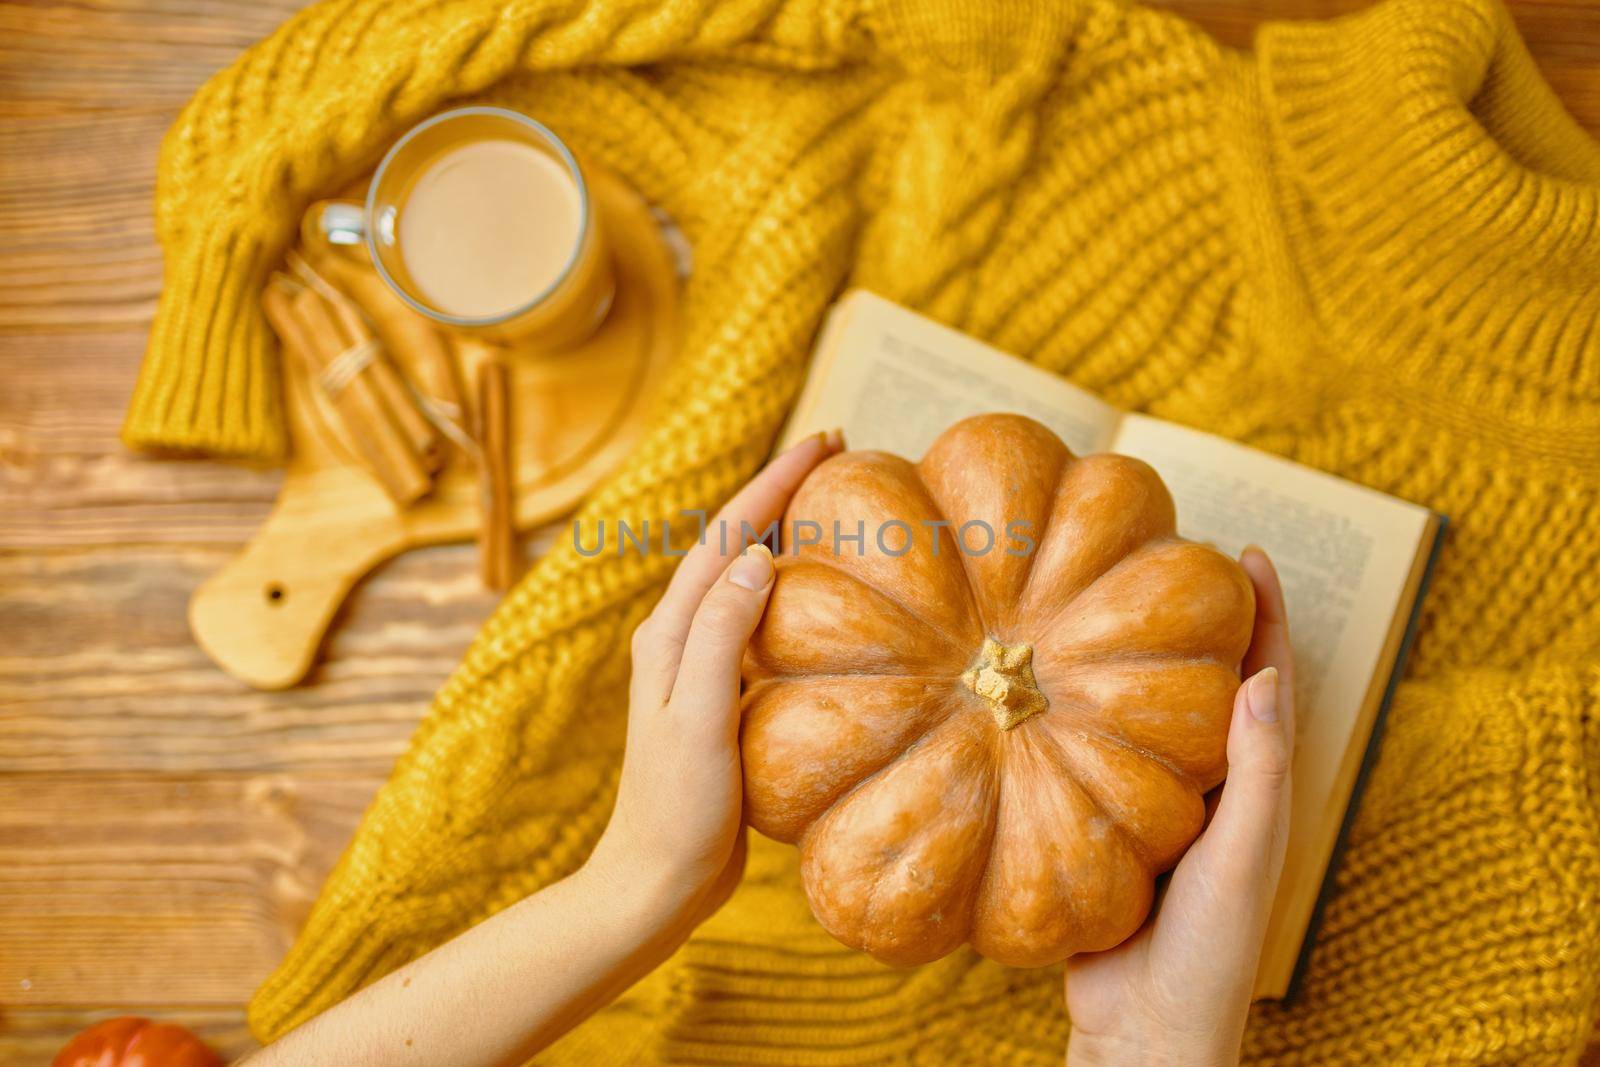 Aromatic coffee with cinnamon sticks on wooden tray. Orange sweater, open book and pumpkin on wooden background. Romantic composition, top view. Round pumpkin in hands over warm knitted sweater.